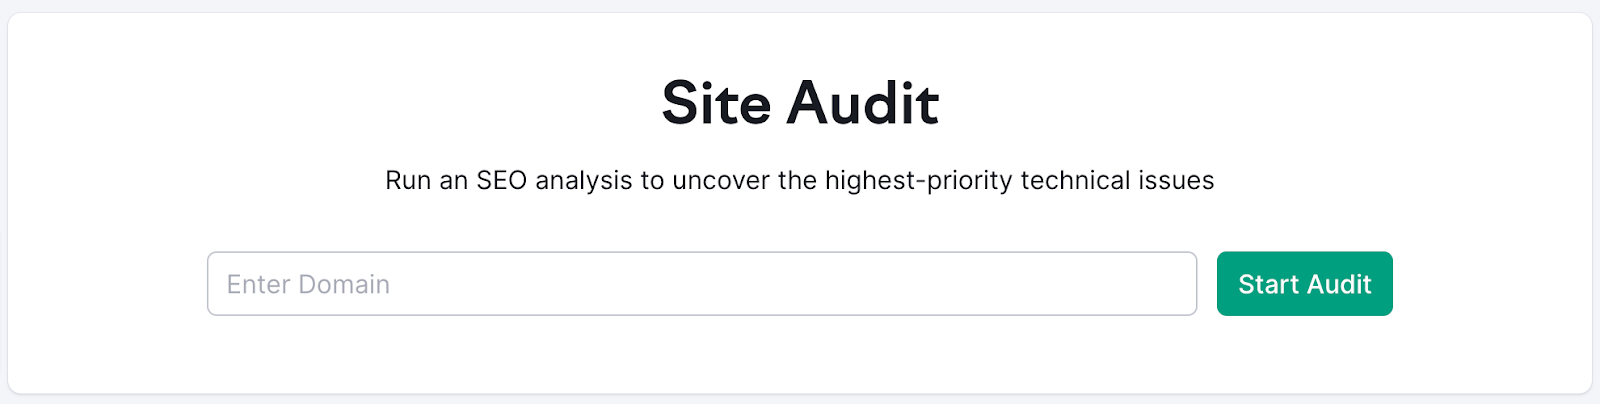 Site Audit tool’s search bar